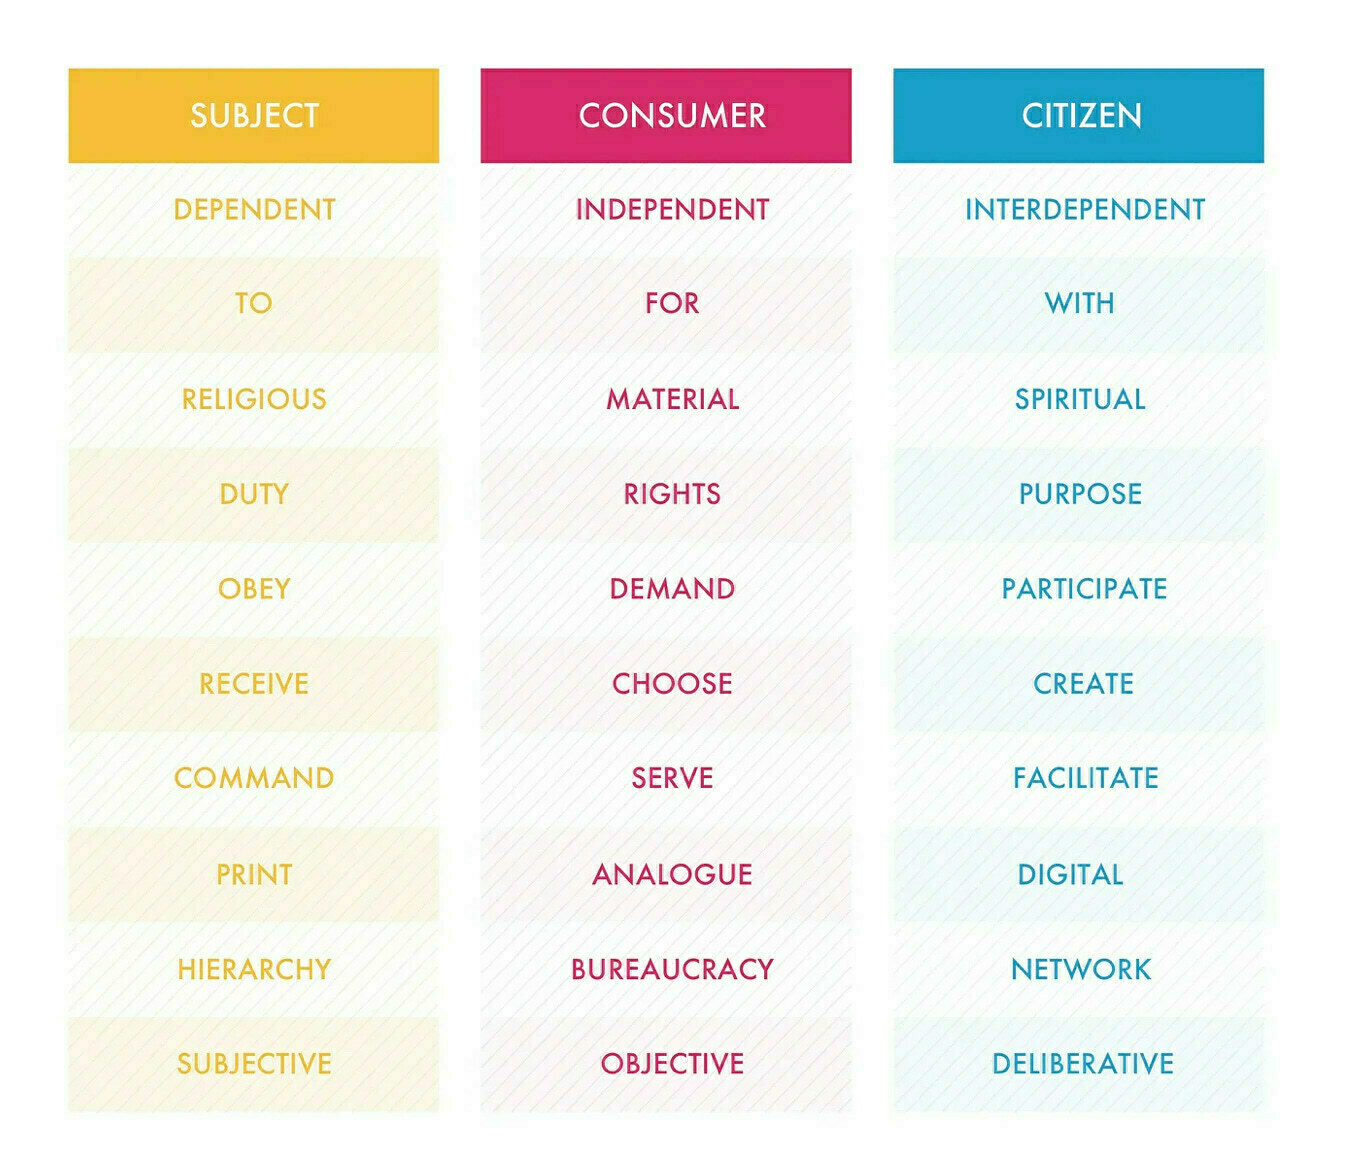 The image features three columns, each representing different societal roles: SUBJECT, CONSUMER, and CITIZEN, each with its own background color—orange, pink, and blue, respectively. For the SUBJECT, words such as DEPENDENT, RELIGIOUS, DUTY, OBEY, RECEIVE, COMMAND, PRINT, HIERARCHY, and SUBJECTIVE are listed, set against a light orange striped background. The CONSUMER column has words like INDEPENDENT, MATERIAL, RIGHTS, DEMAND, CHOOSE, SERVE, ANALOGUE, BUREAUCRACY, and OBJECTIVE, all on a pink striped background. Lastly, the CITIZEN column lists INTERDEPENDENT, SPIRITUAL, PURPOSE, PARTICIPATE, CREATE, FACILITATE, DIGITAL, NETWORK, and DELIBERATIVE, against a light blue striped background. The text is arranged vertically in a sans-serif font, and each word is placed in a horizontal alignment with its counterparts in the other columns.